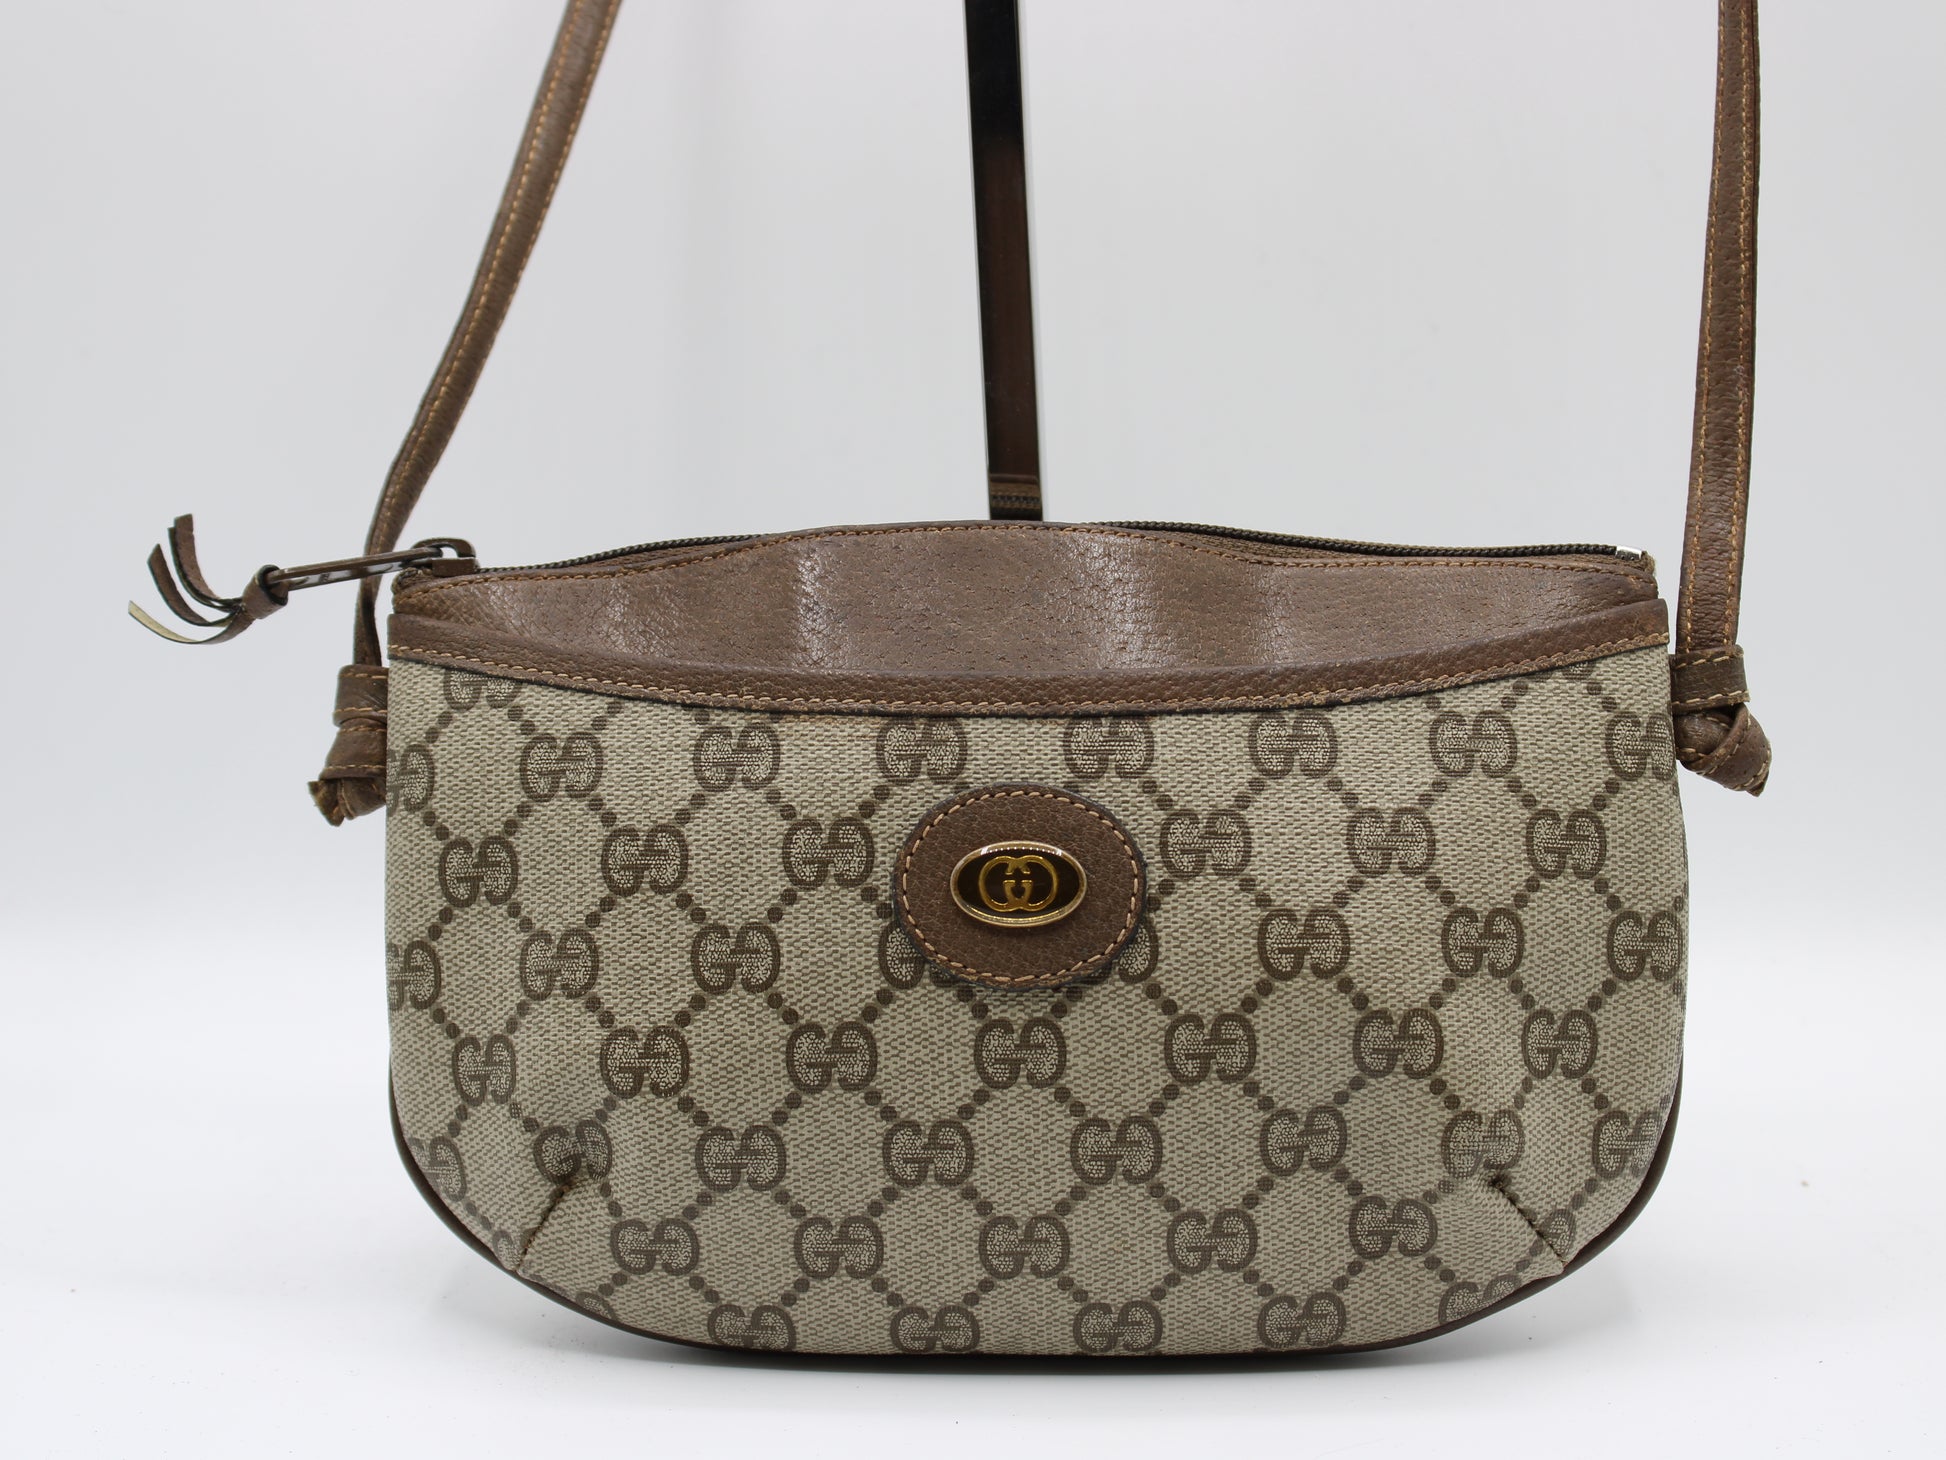 Gucci GG Supreme Monogram Canvas Leather Crossbody Pochette Bag Brown front magnifying  view